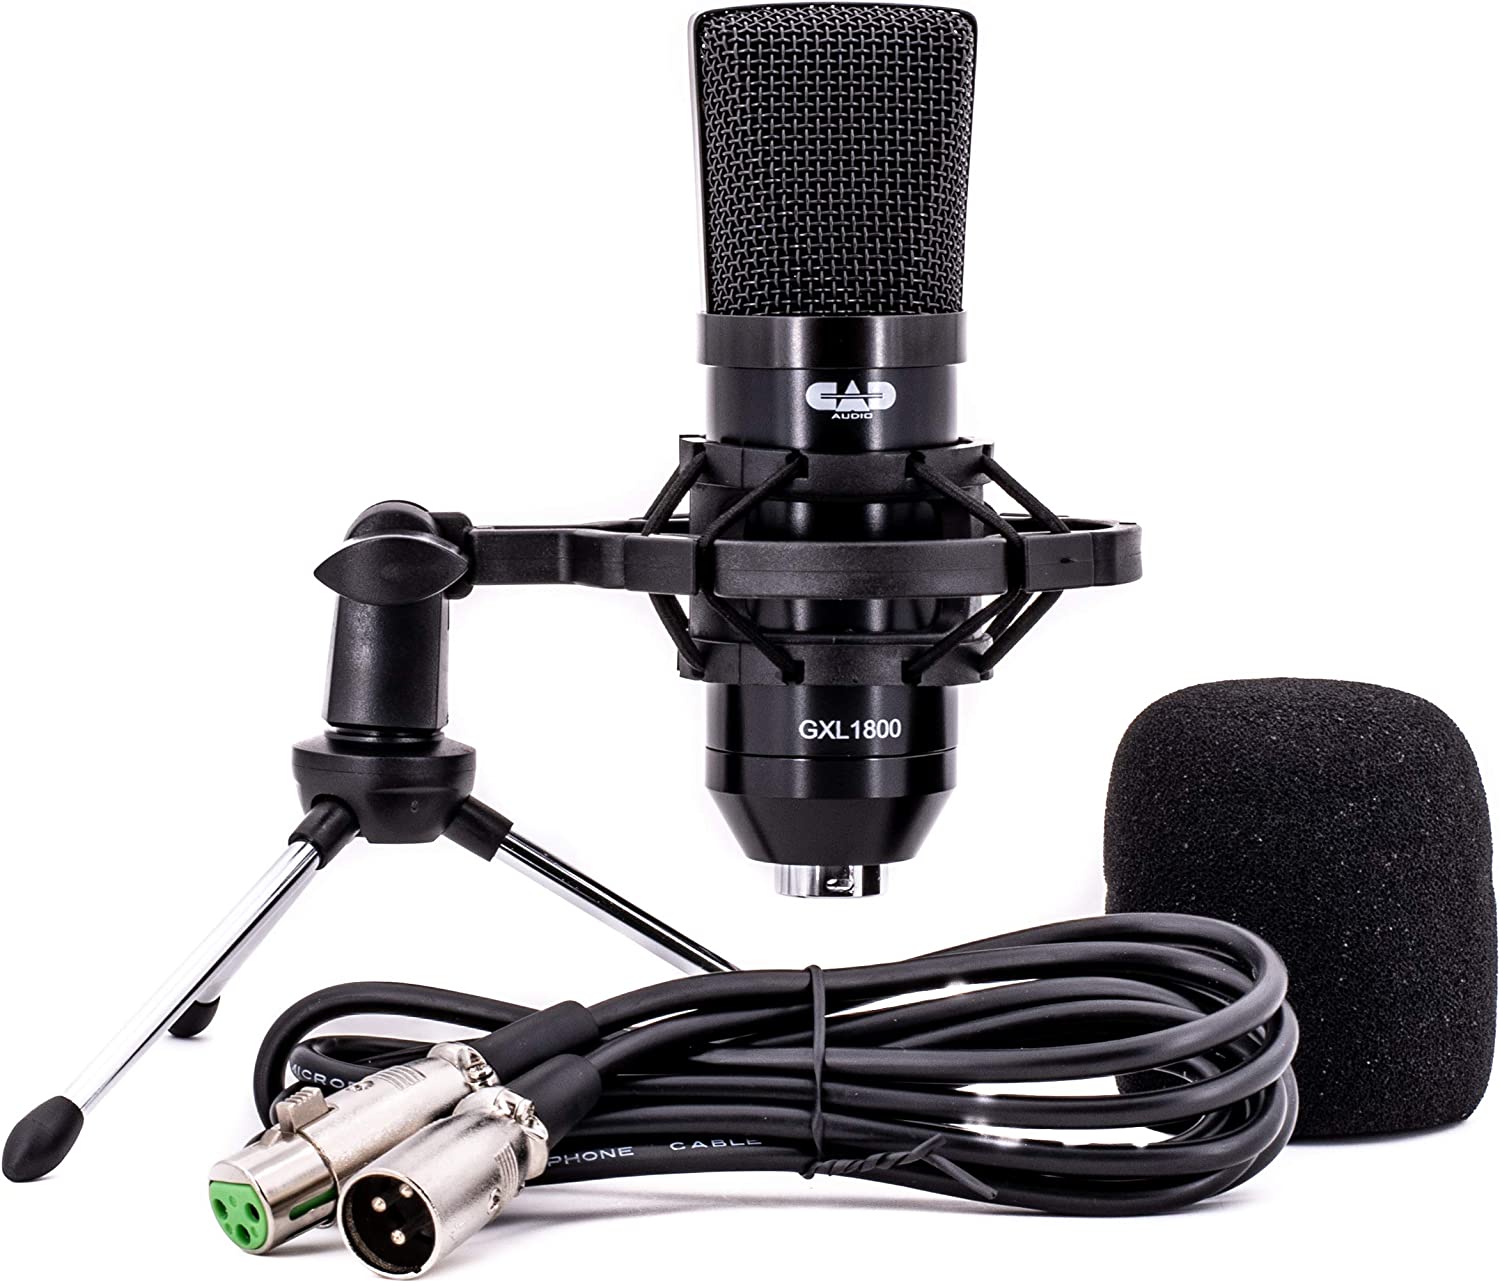 CAD Audio GXL1800SP Studio Pack with GXL1800 Side Address & GLX800 Small Diaphragm Mic - Perfect for Studio, Podcasting & Streaming